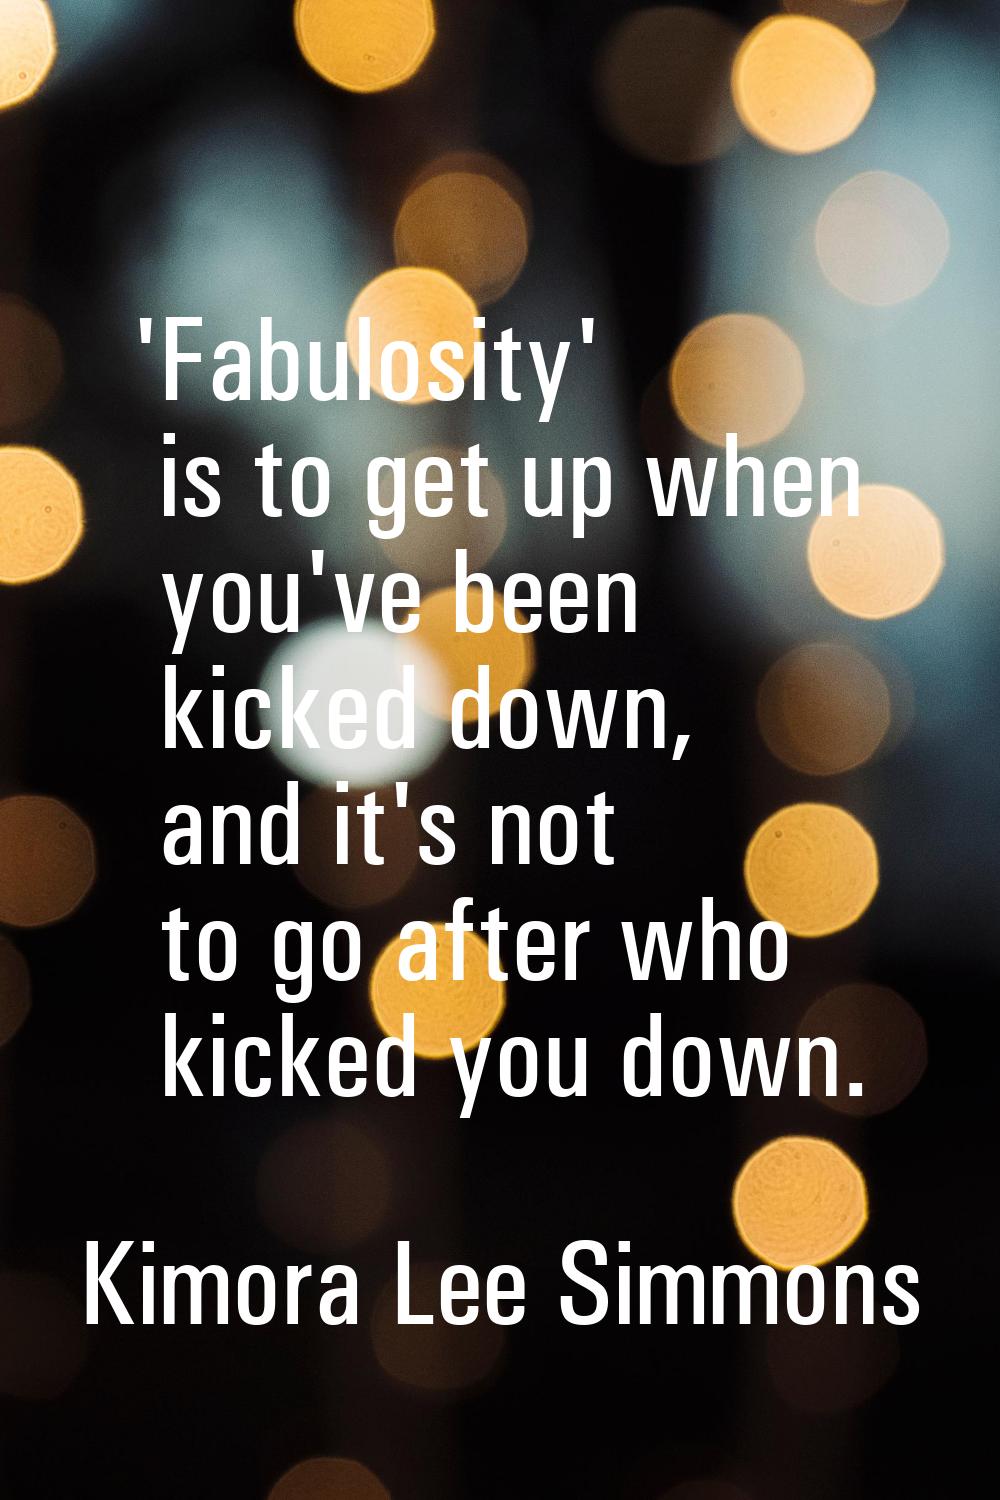 'Fabulosity' is to get up when you've been kicked down, and it's not to go after who kicked you dow